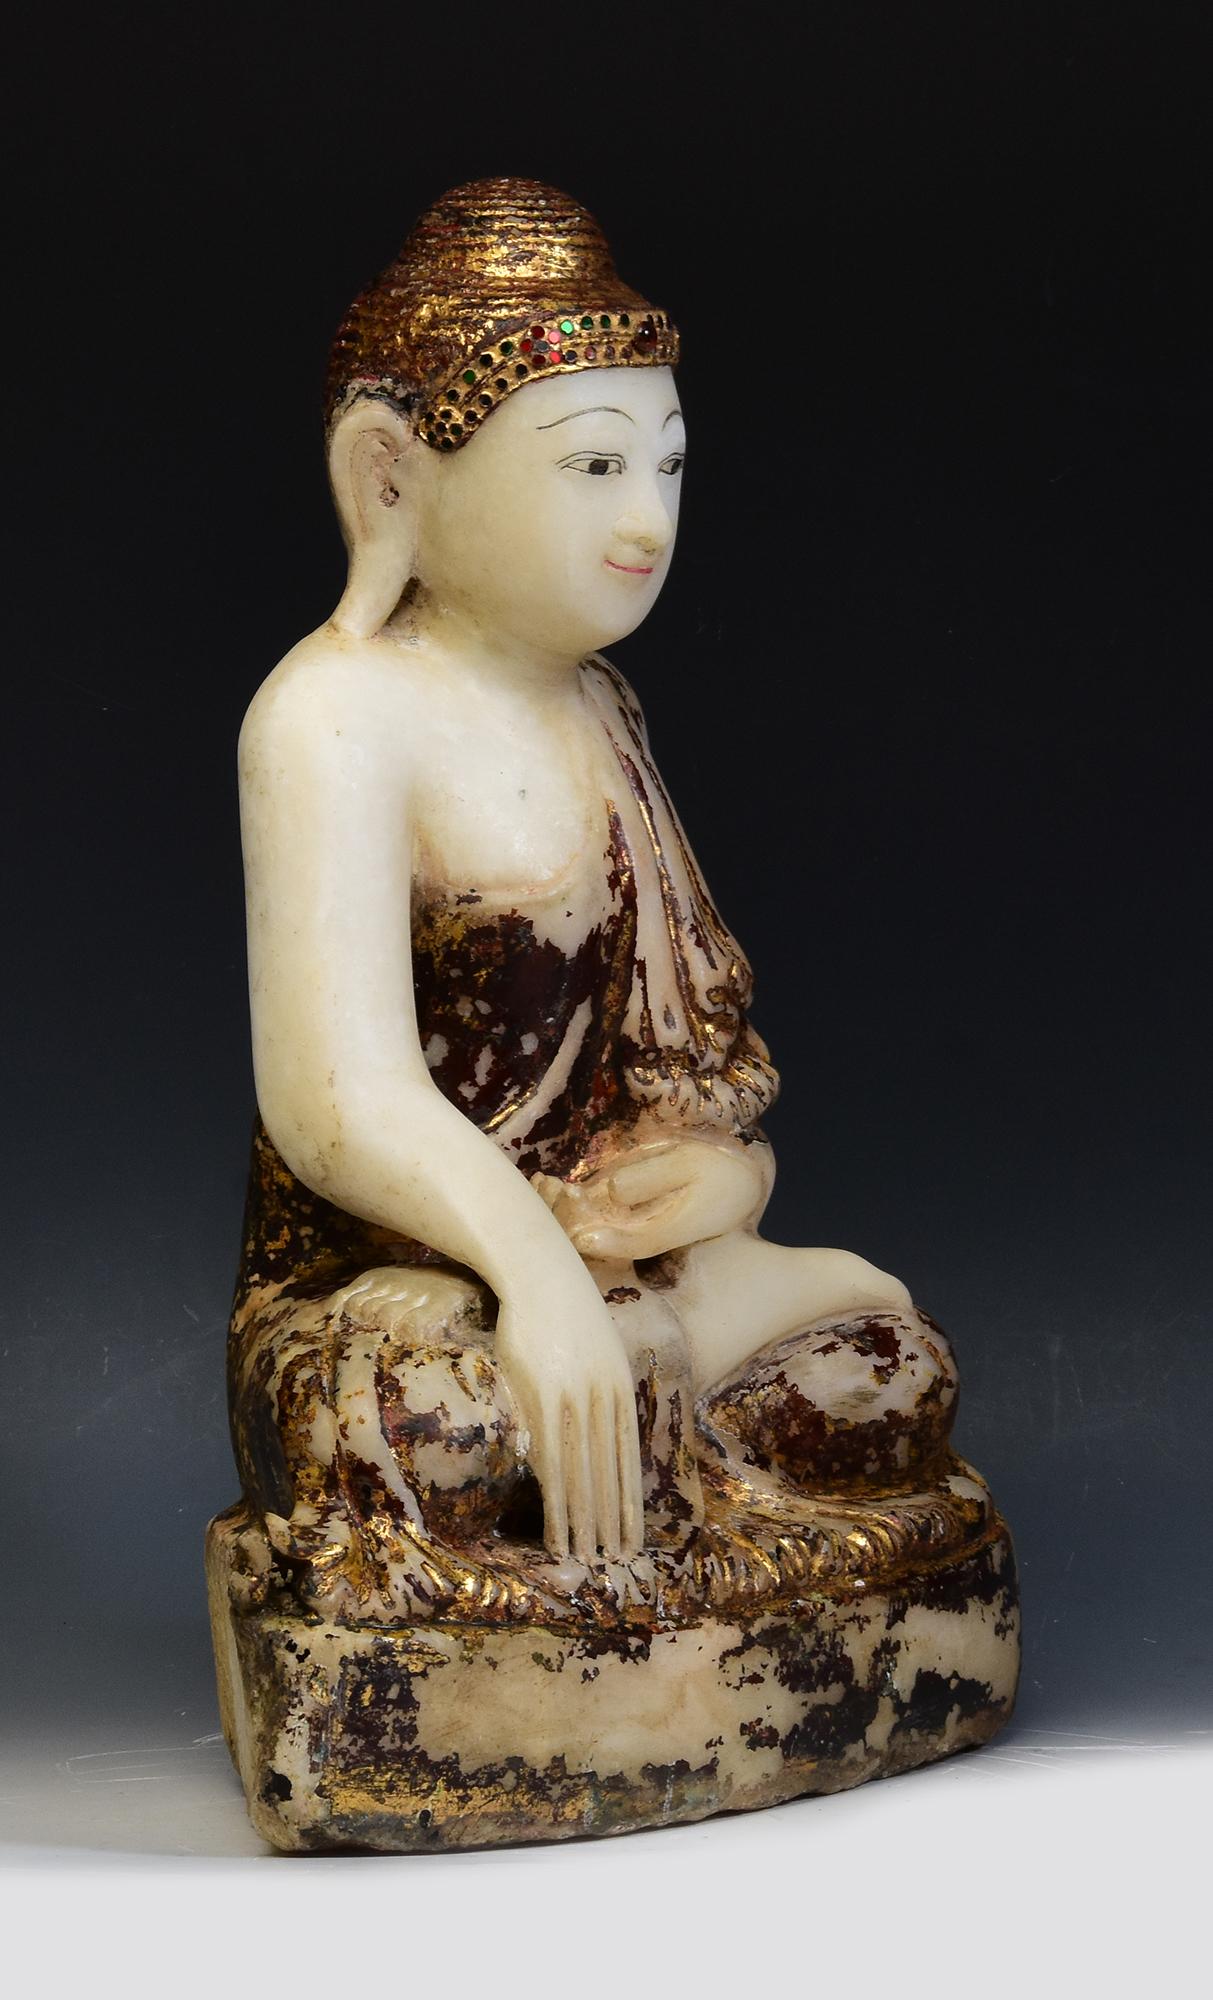 19th Century, Mandalay, Antique Burmese Alabaster Marble Seated Buddha Statue For Sale 9